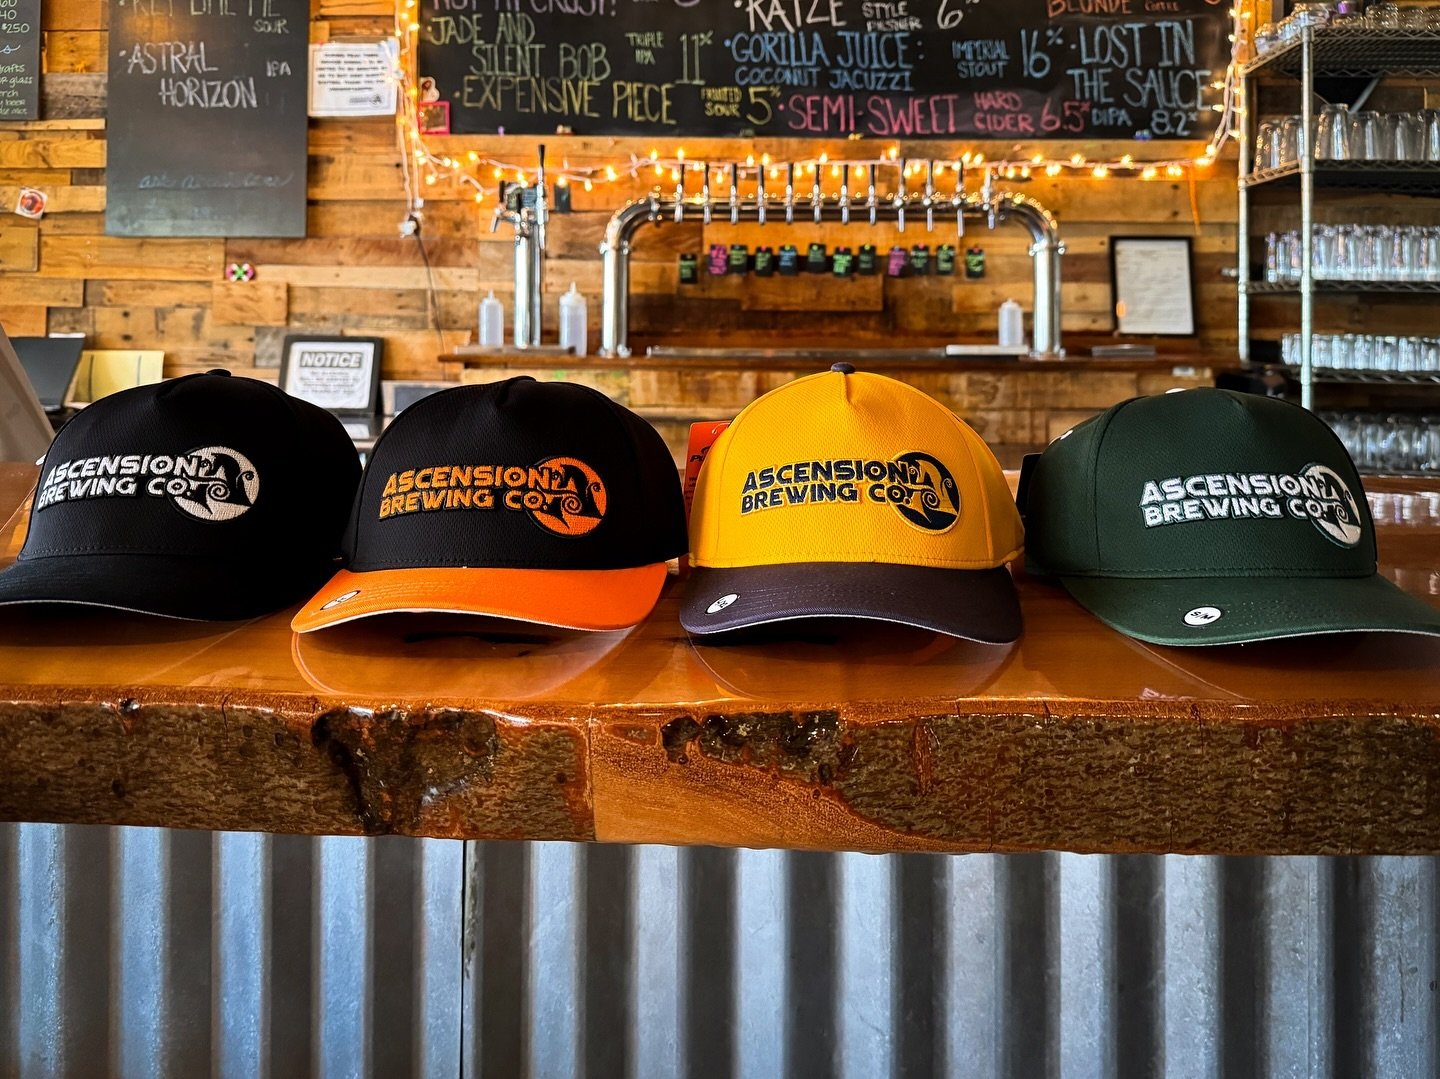 Finally&hellip; HATS - HAVE COME BACK - to the taproom! 

My only question to you is: Which one are you coppin&rsquo;?